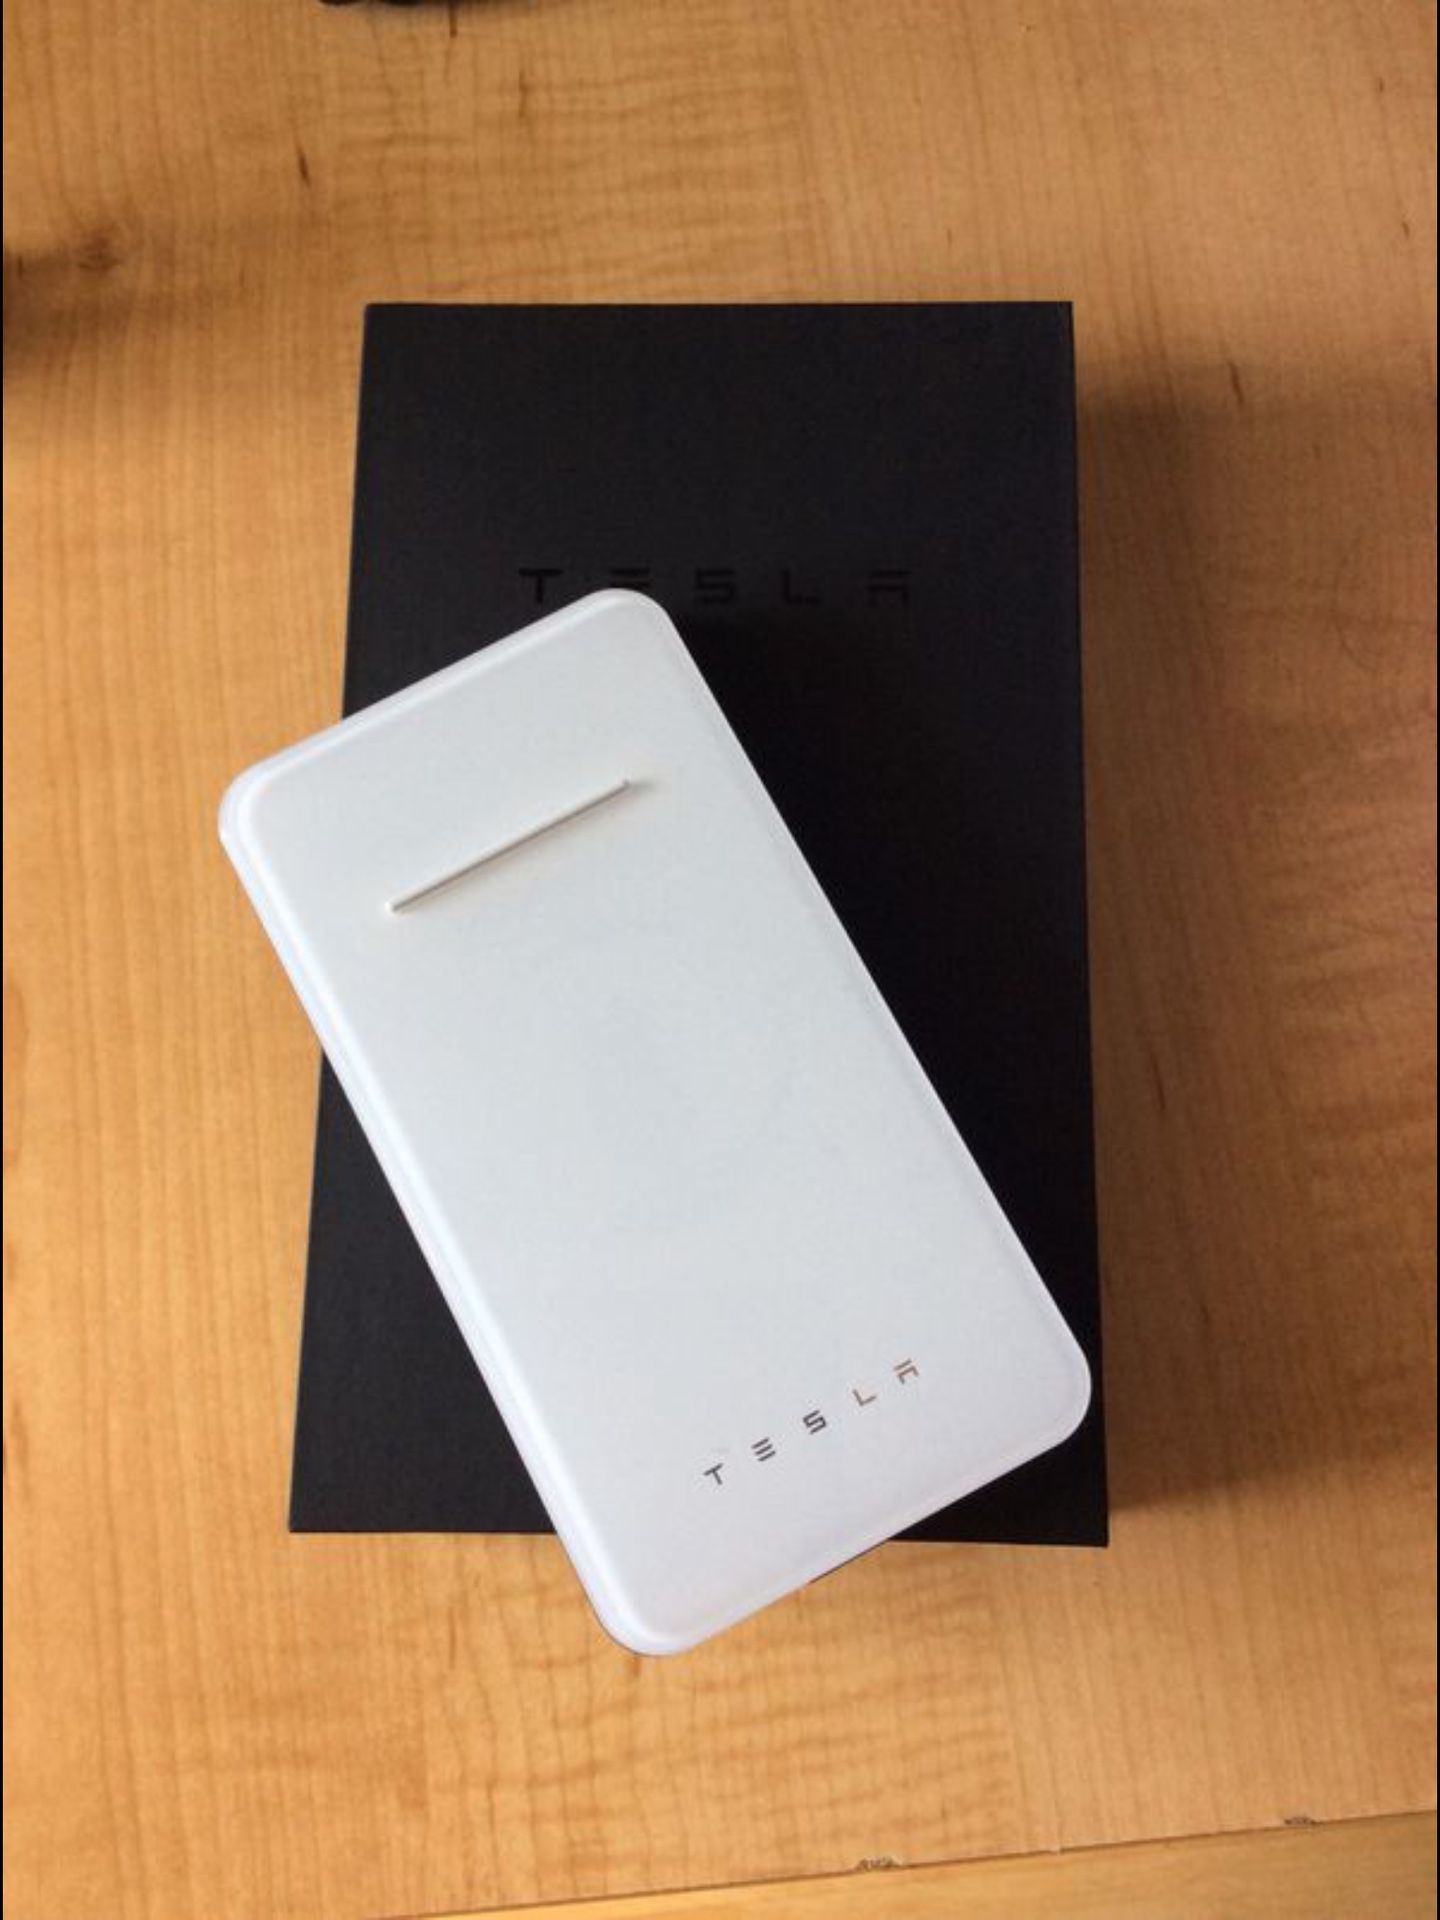 Tesla wireless and wire power bank